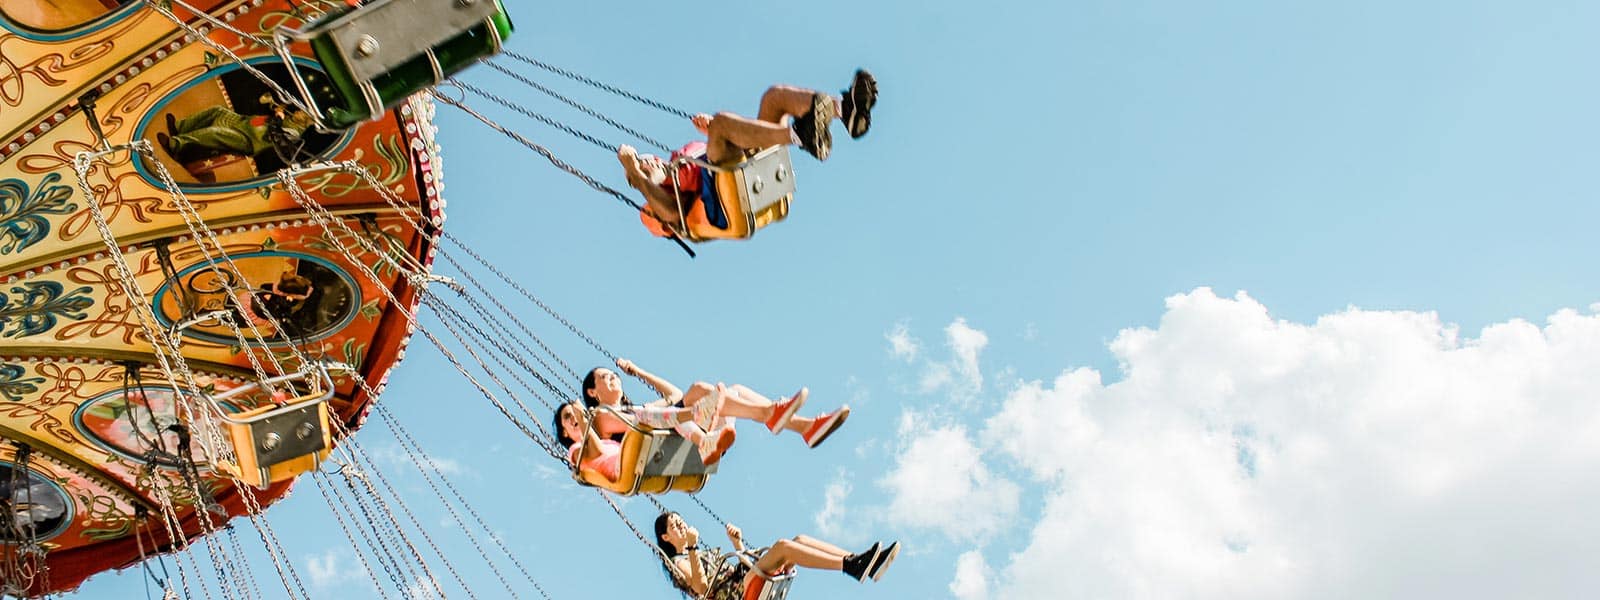 CAMPASUN - Amusement parks in the Var : Have fun with family and friends